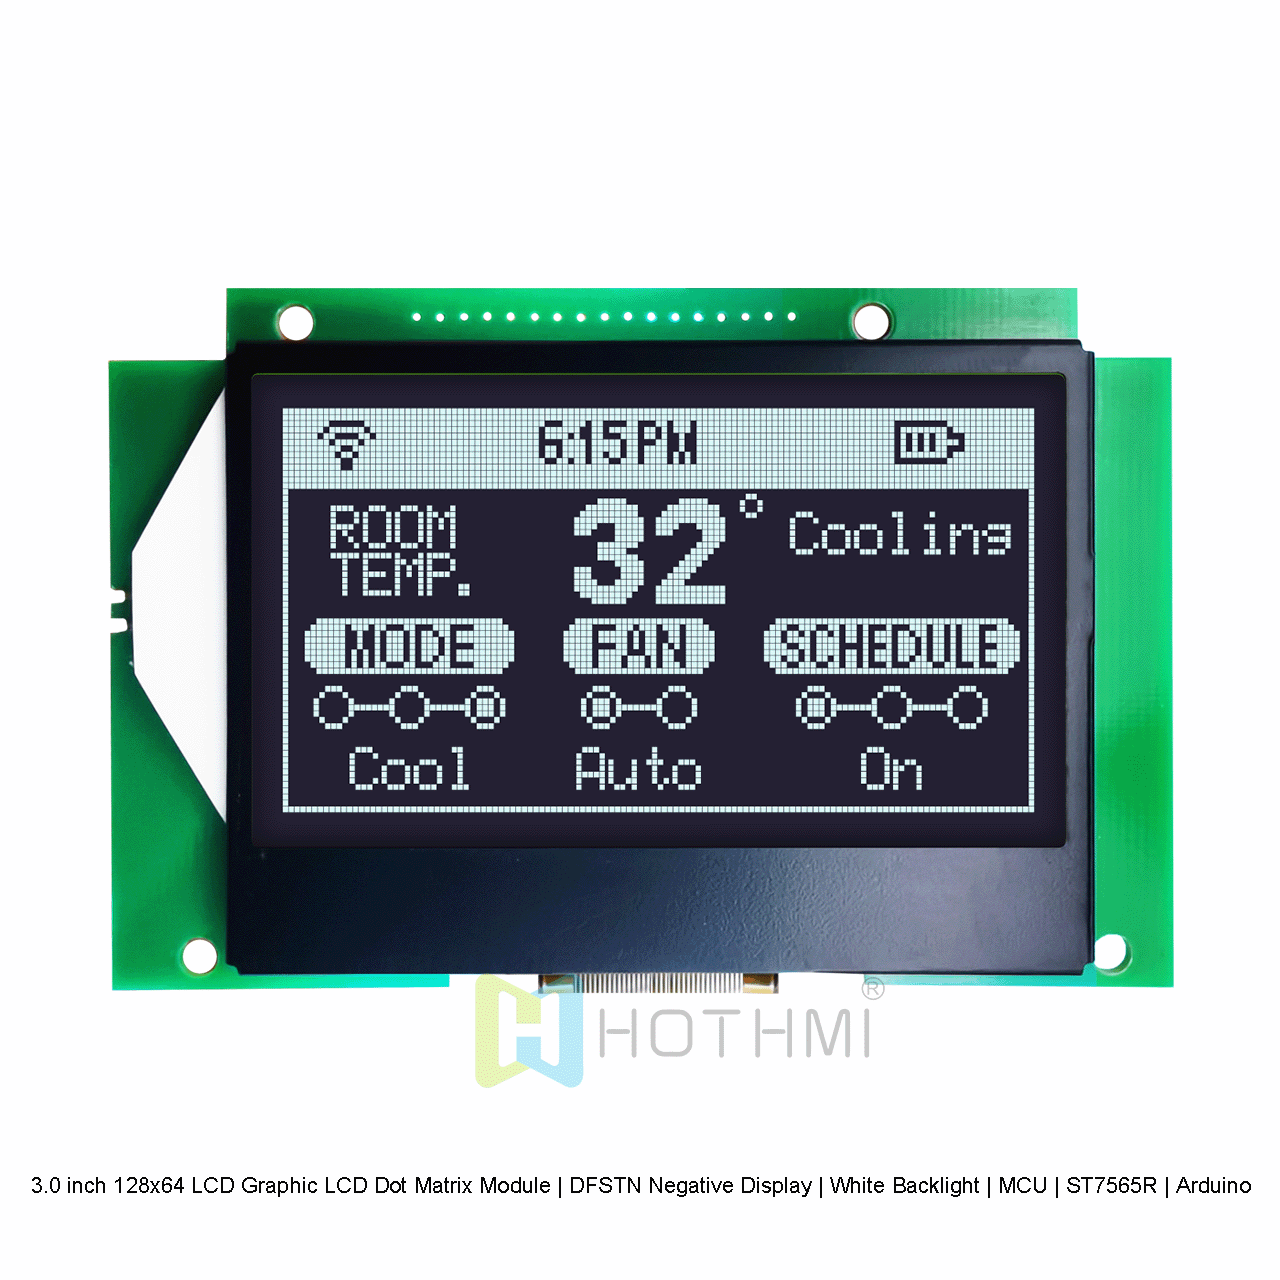 3.0 inch 128x64 LCD Graphic LCD Dot Matrix Module | DFSTN Negative Display | White Backlight | MCU | ST7565R | Arduino | Black Background White Characters